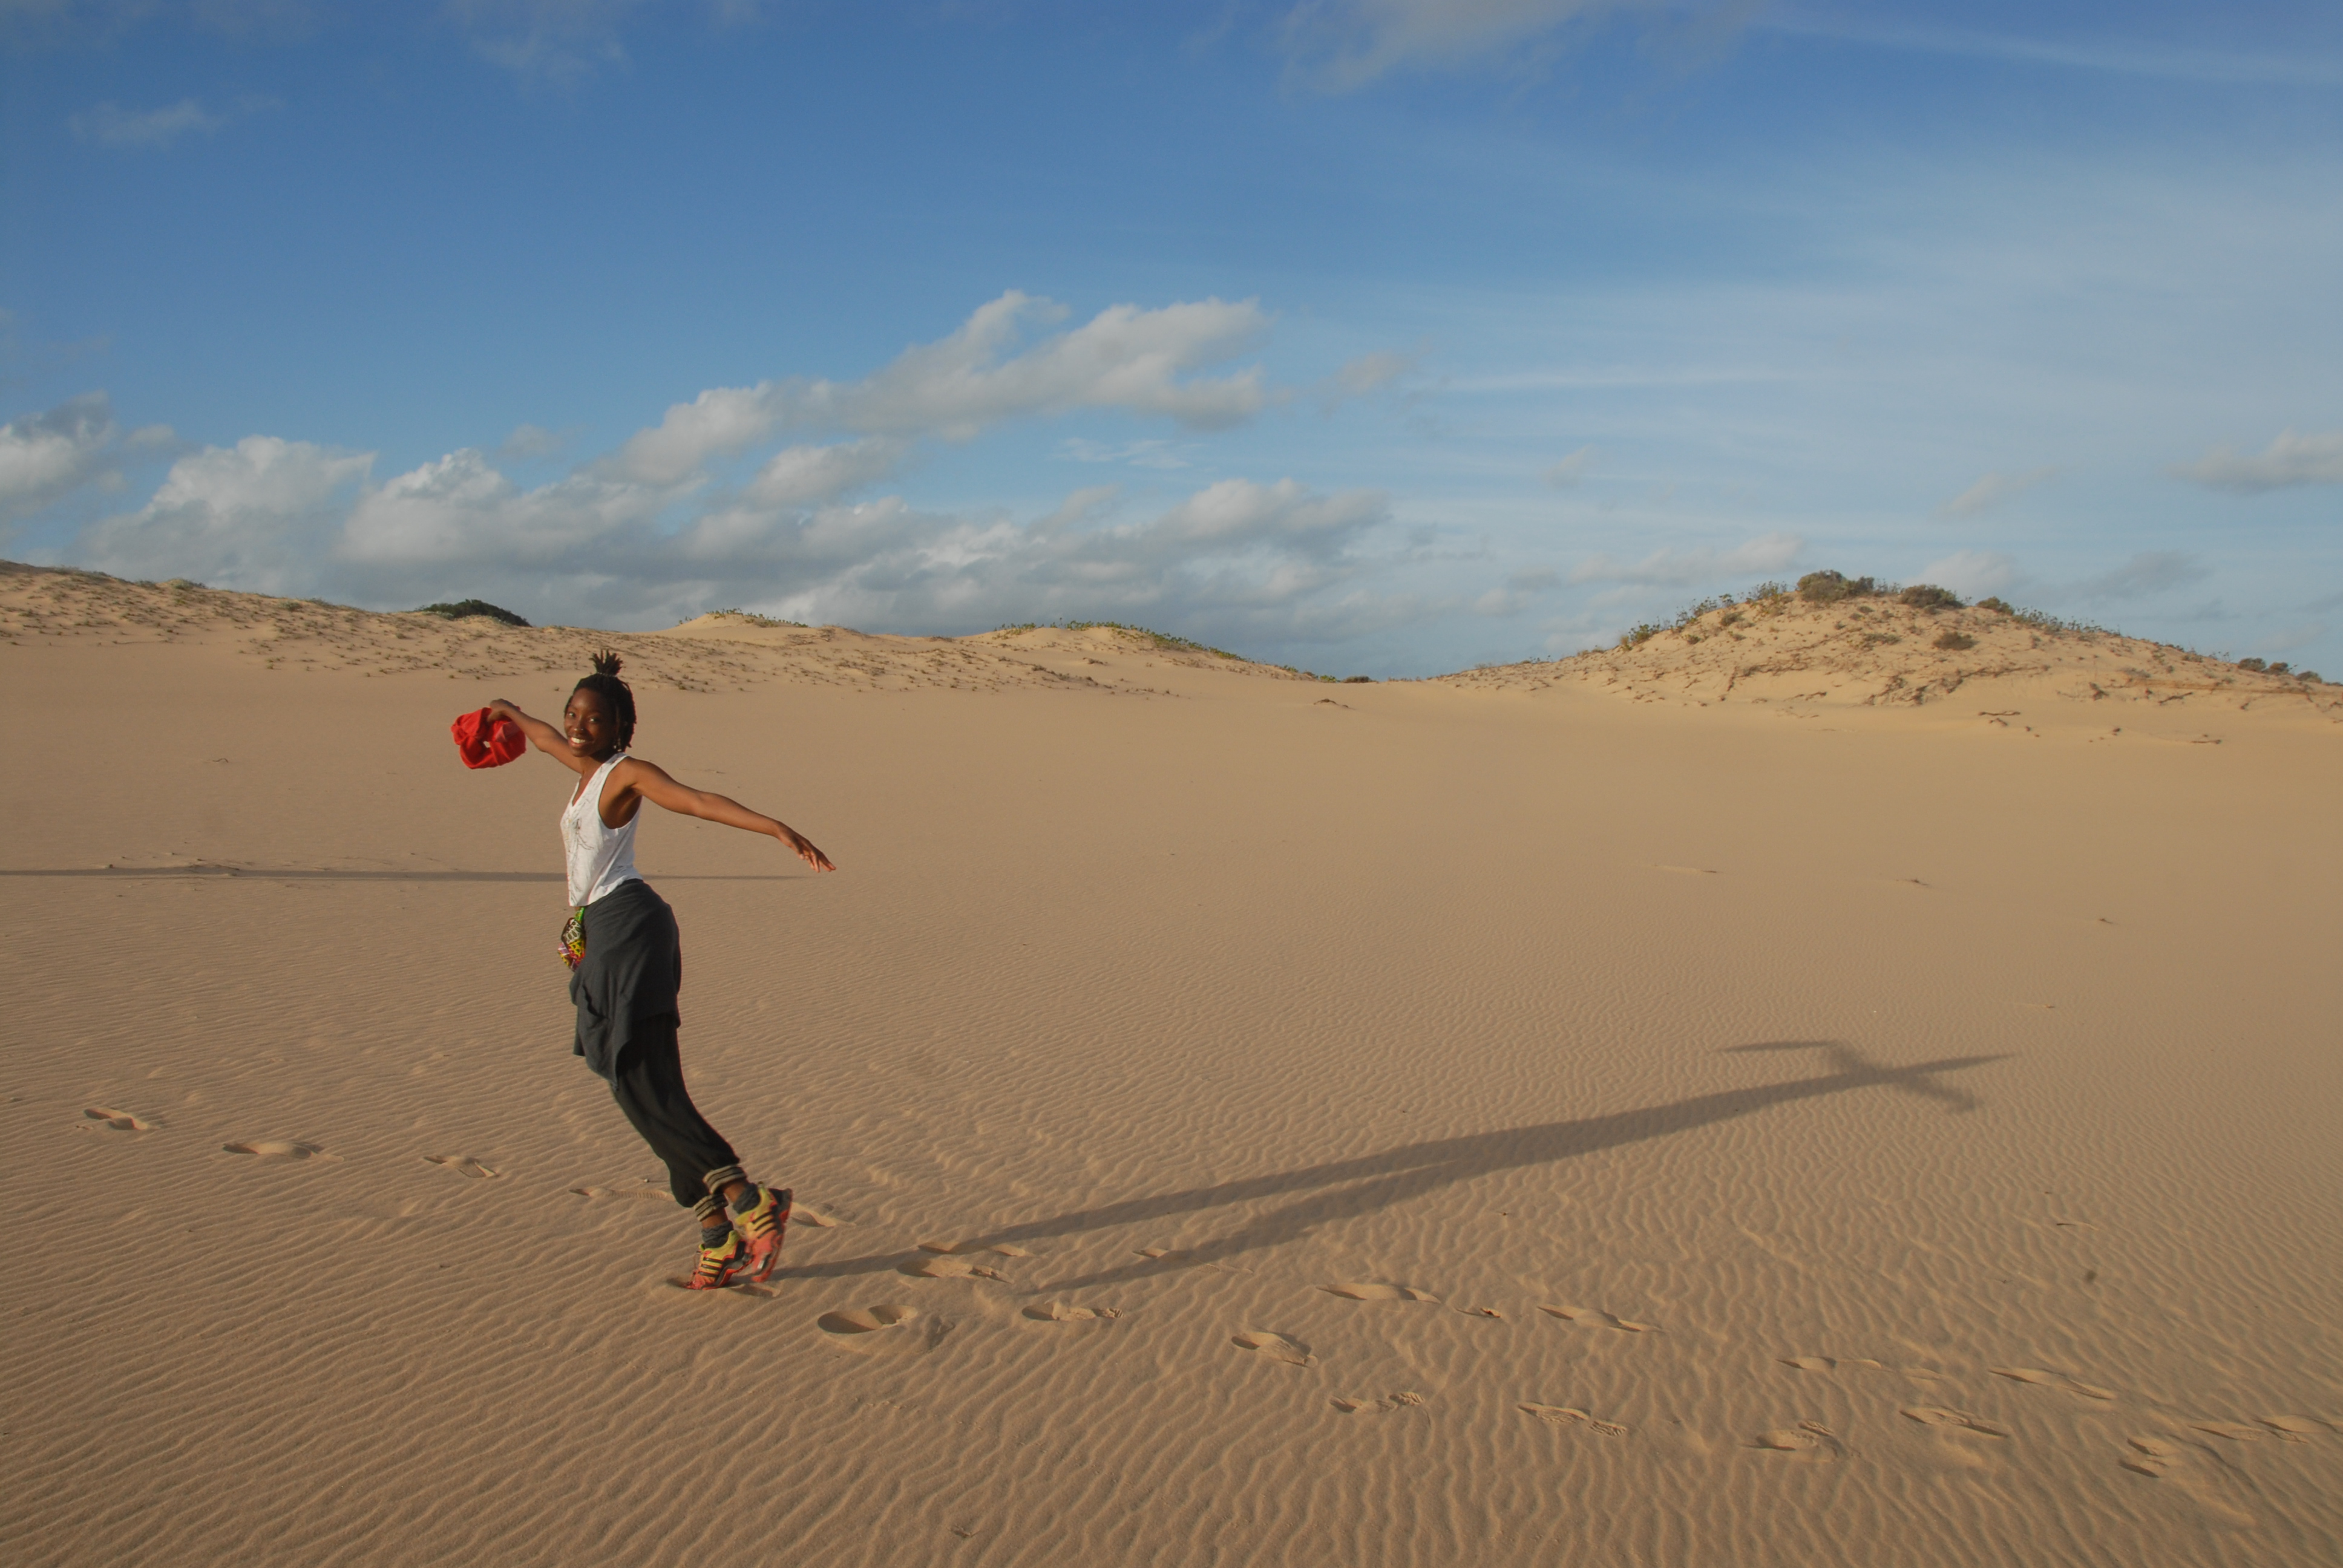 Playing on a sand dune. 